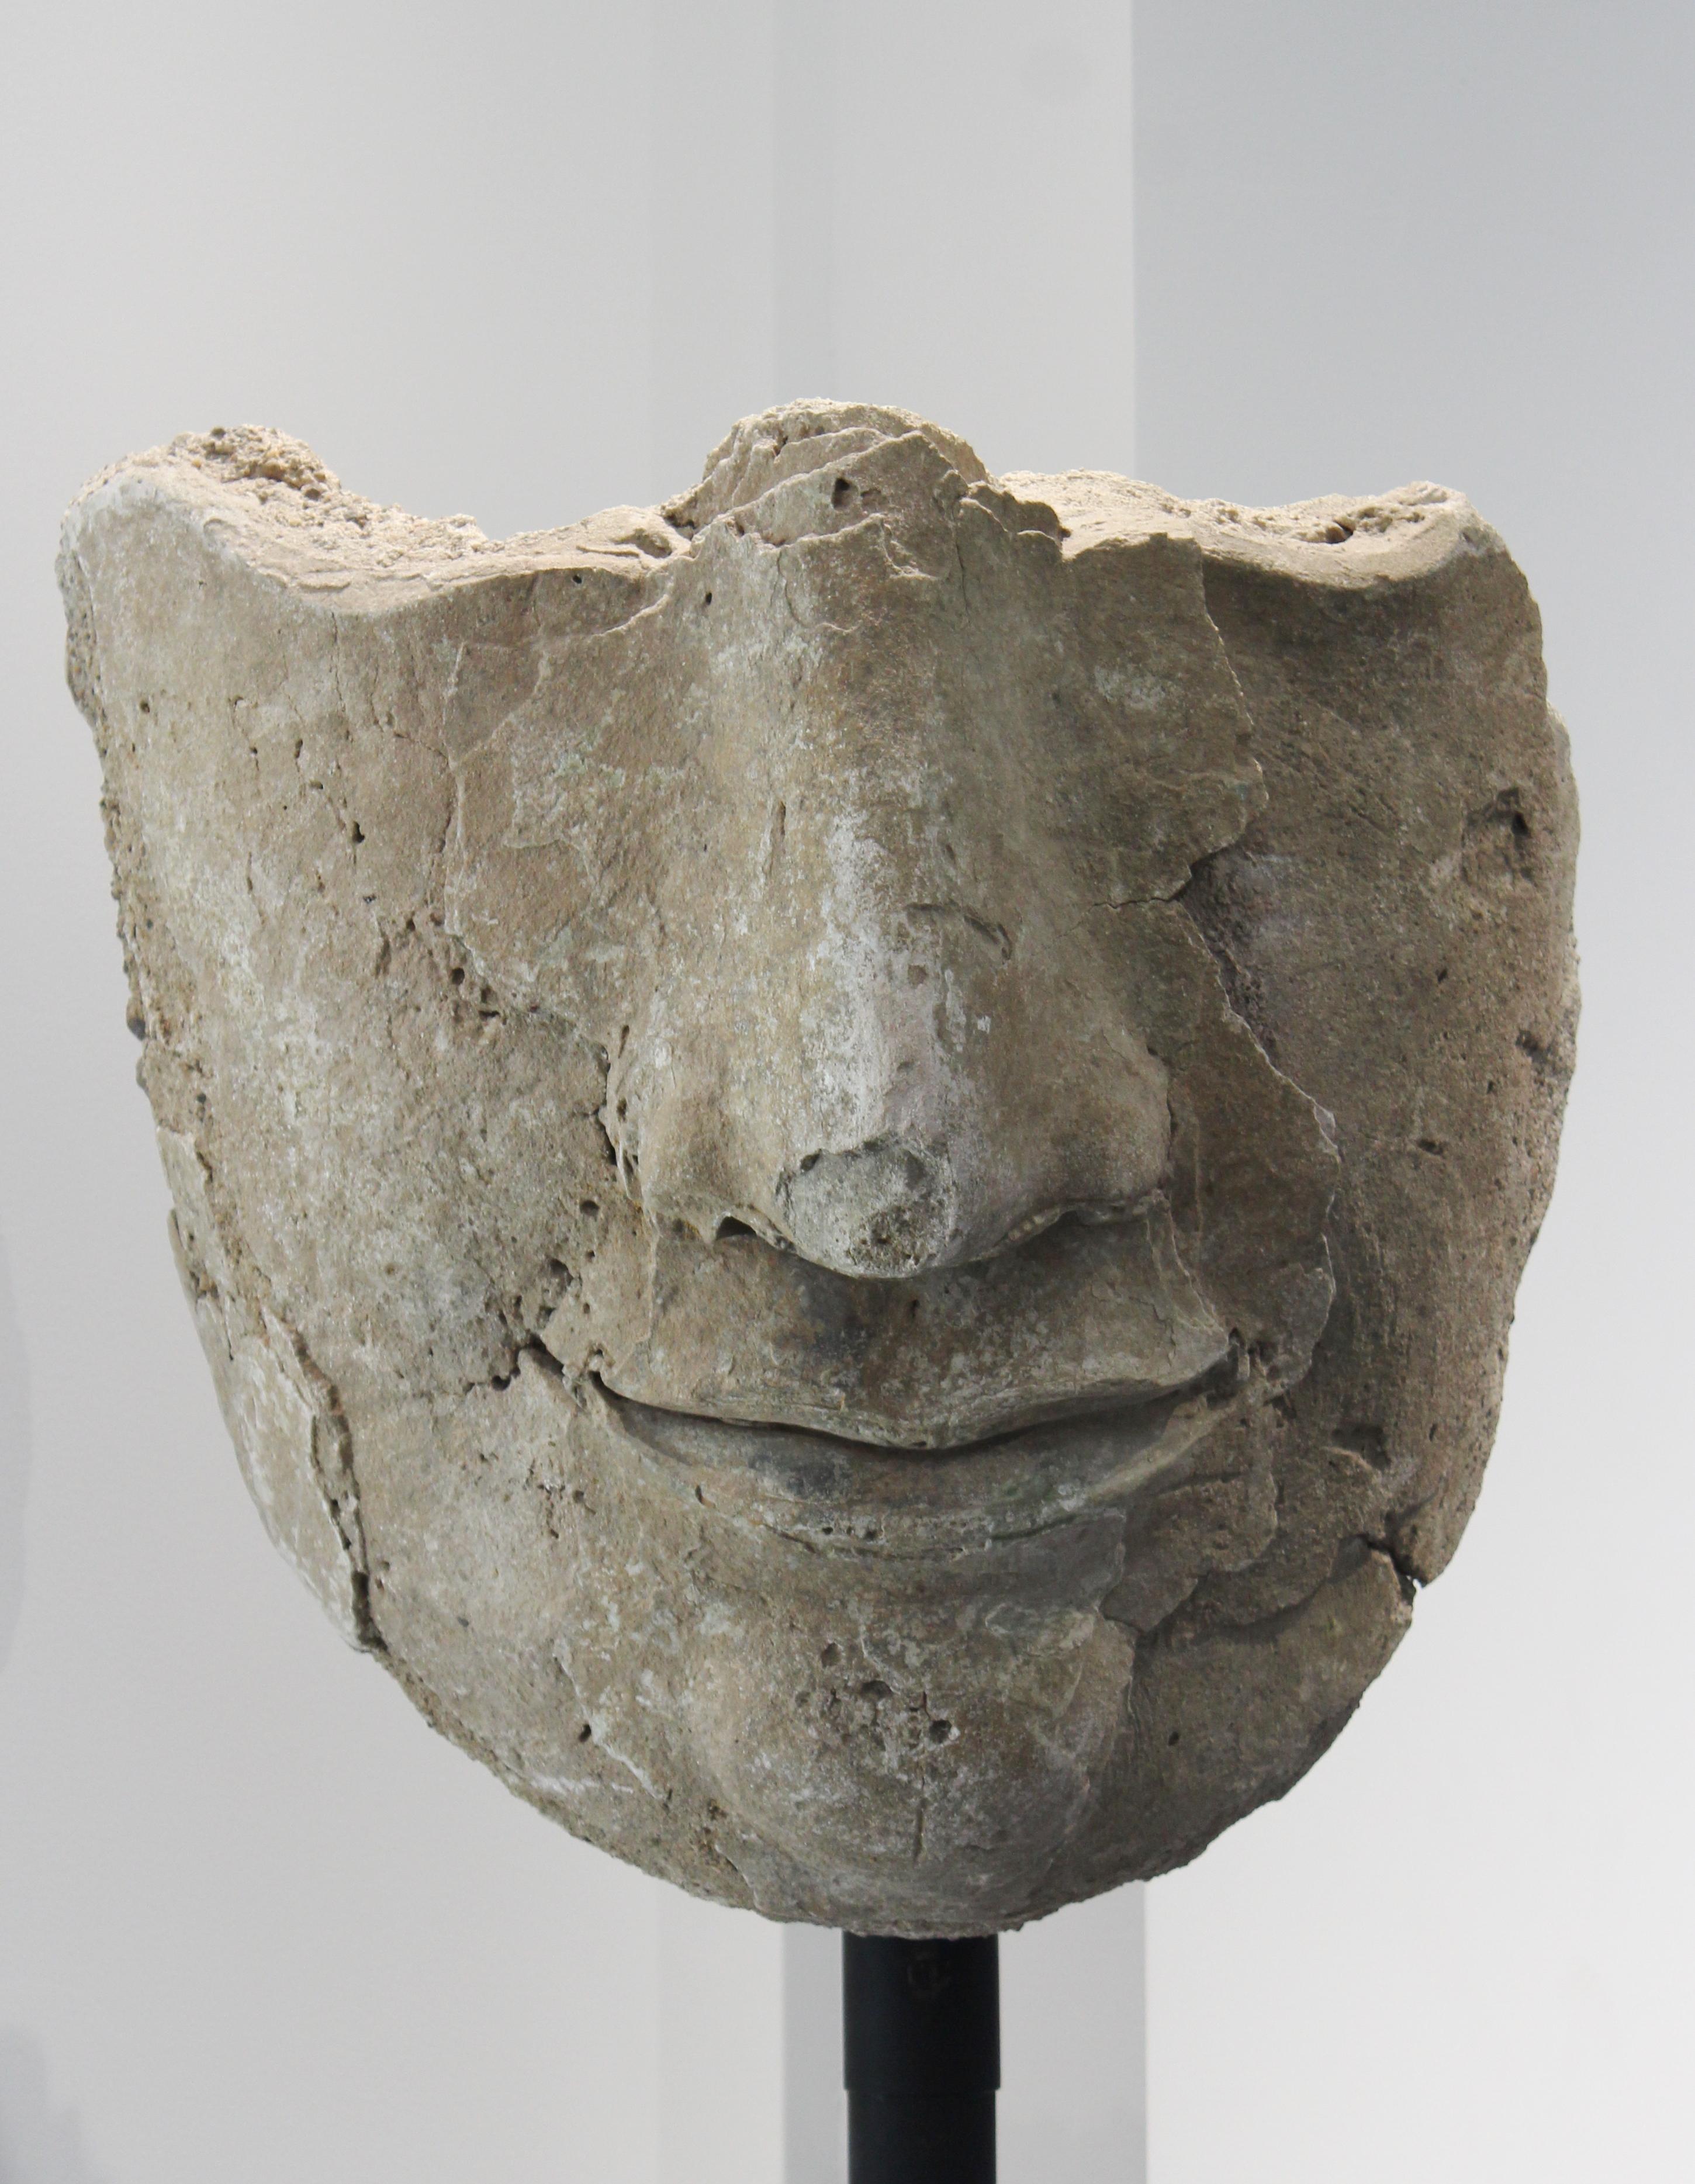 Sukhothai period fragmentary stucco head of Buddha or Bodhisattva with custom made stand, mounted on pedestal, circa 1450. Reported recovered from the central sanctuary tower of the Wat Phrai Phai Luang (the 'Temple of The Great Wind' founded under